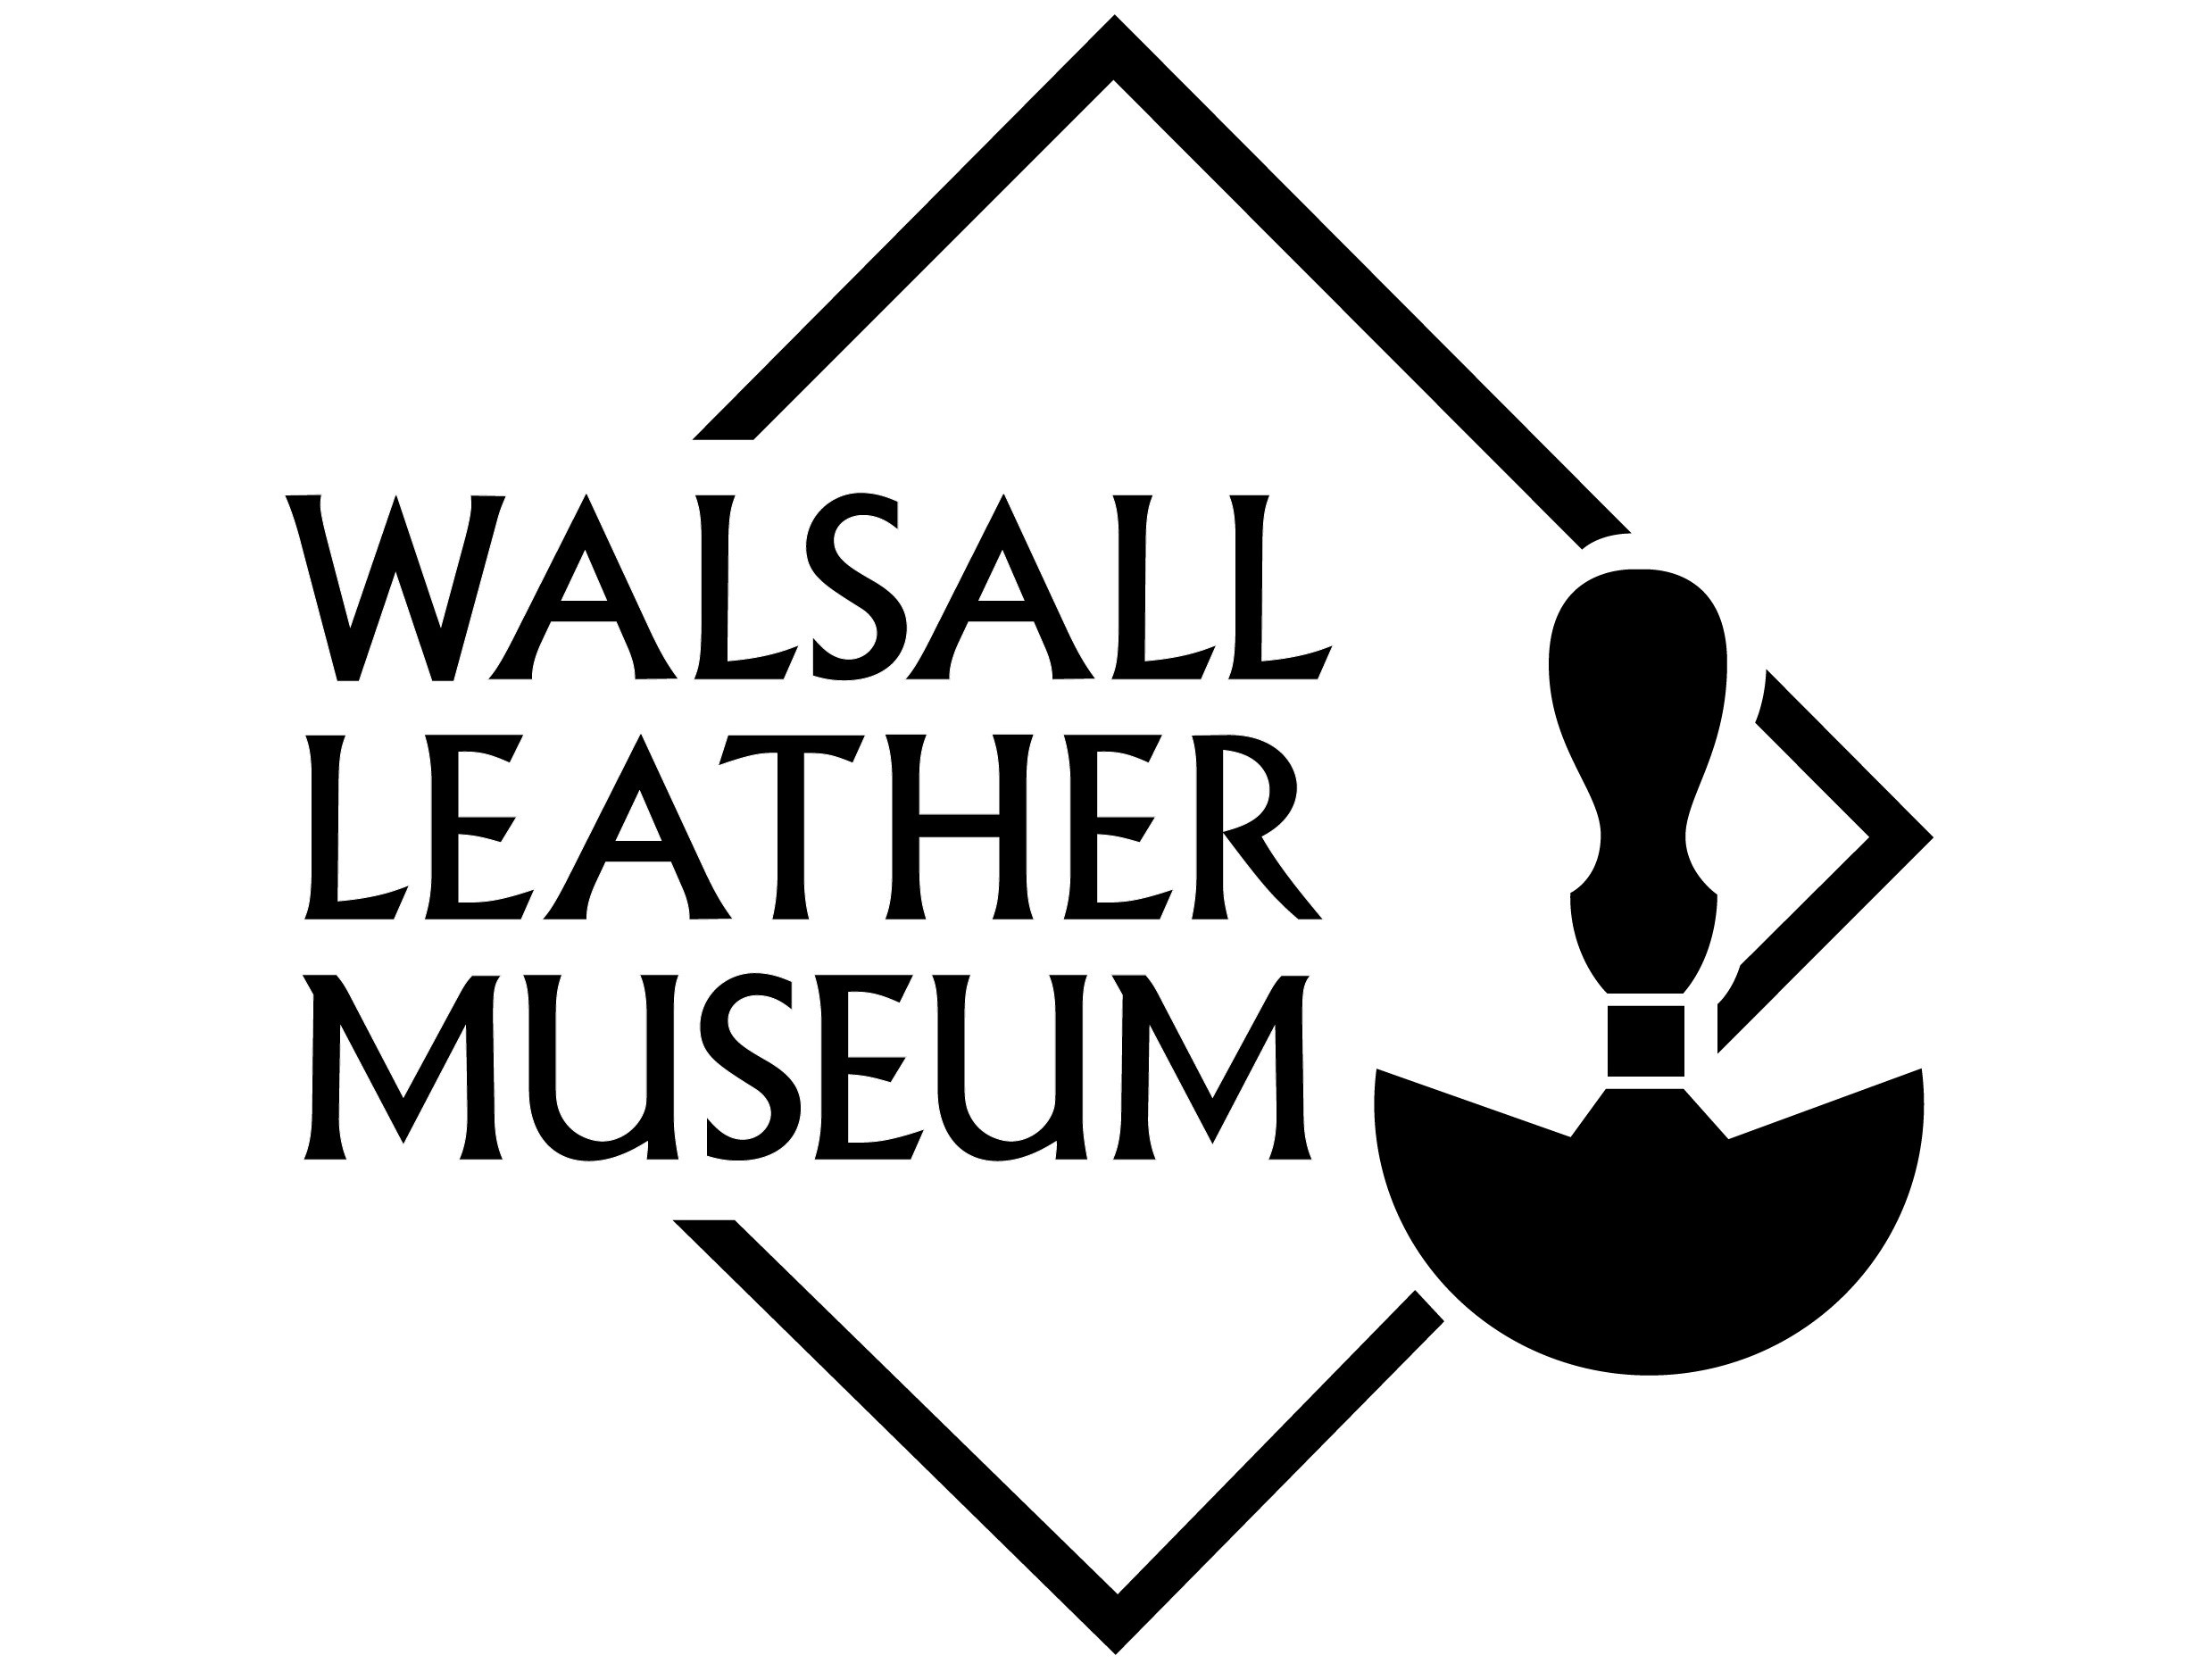 Walsall Leather Museum logo